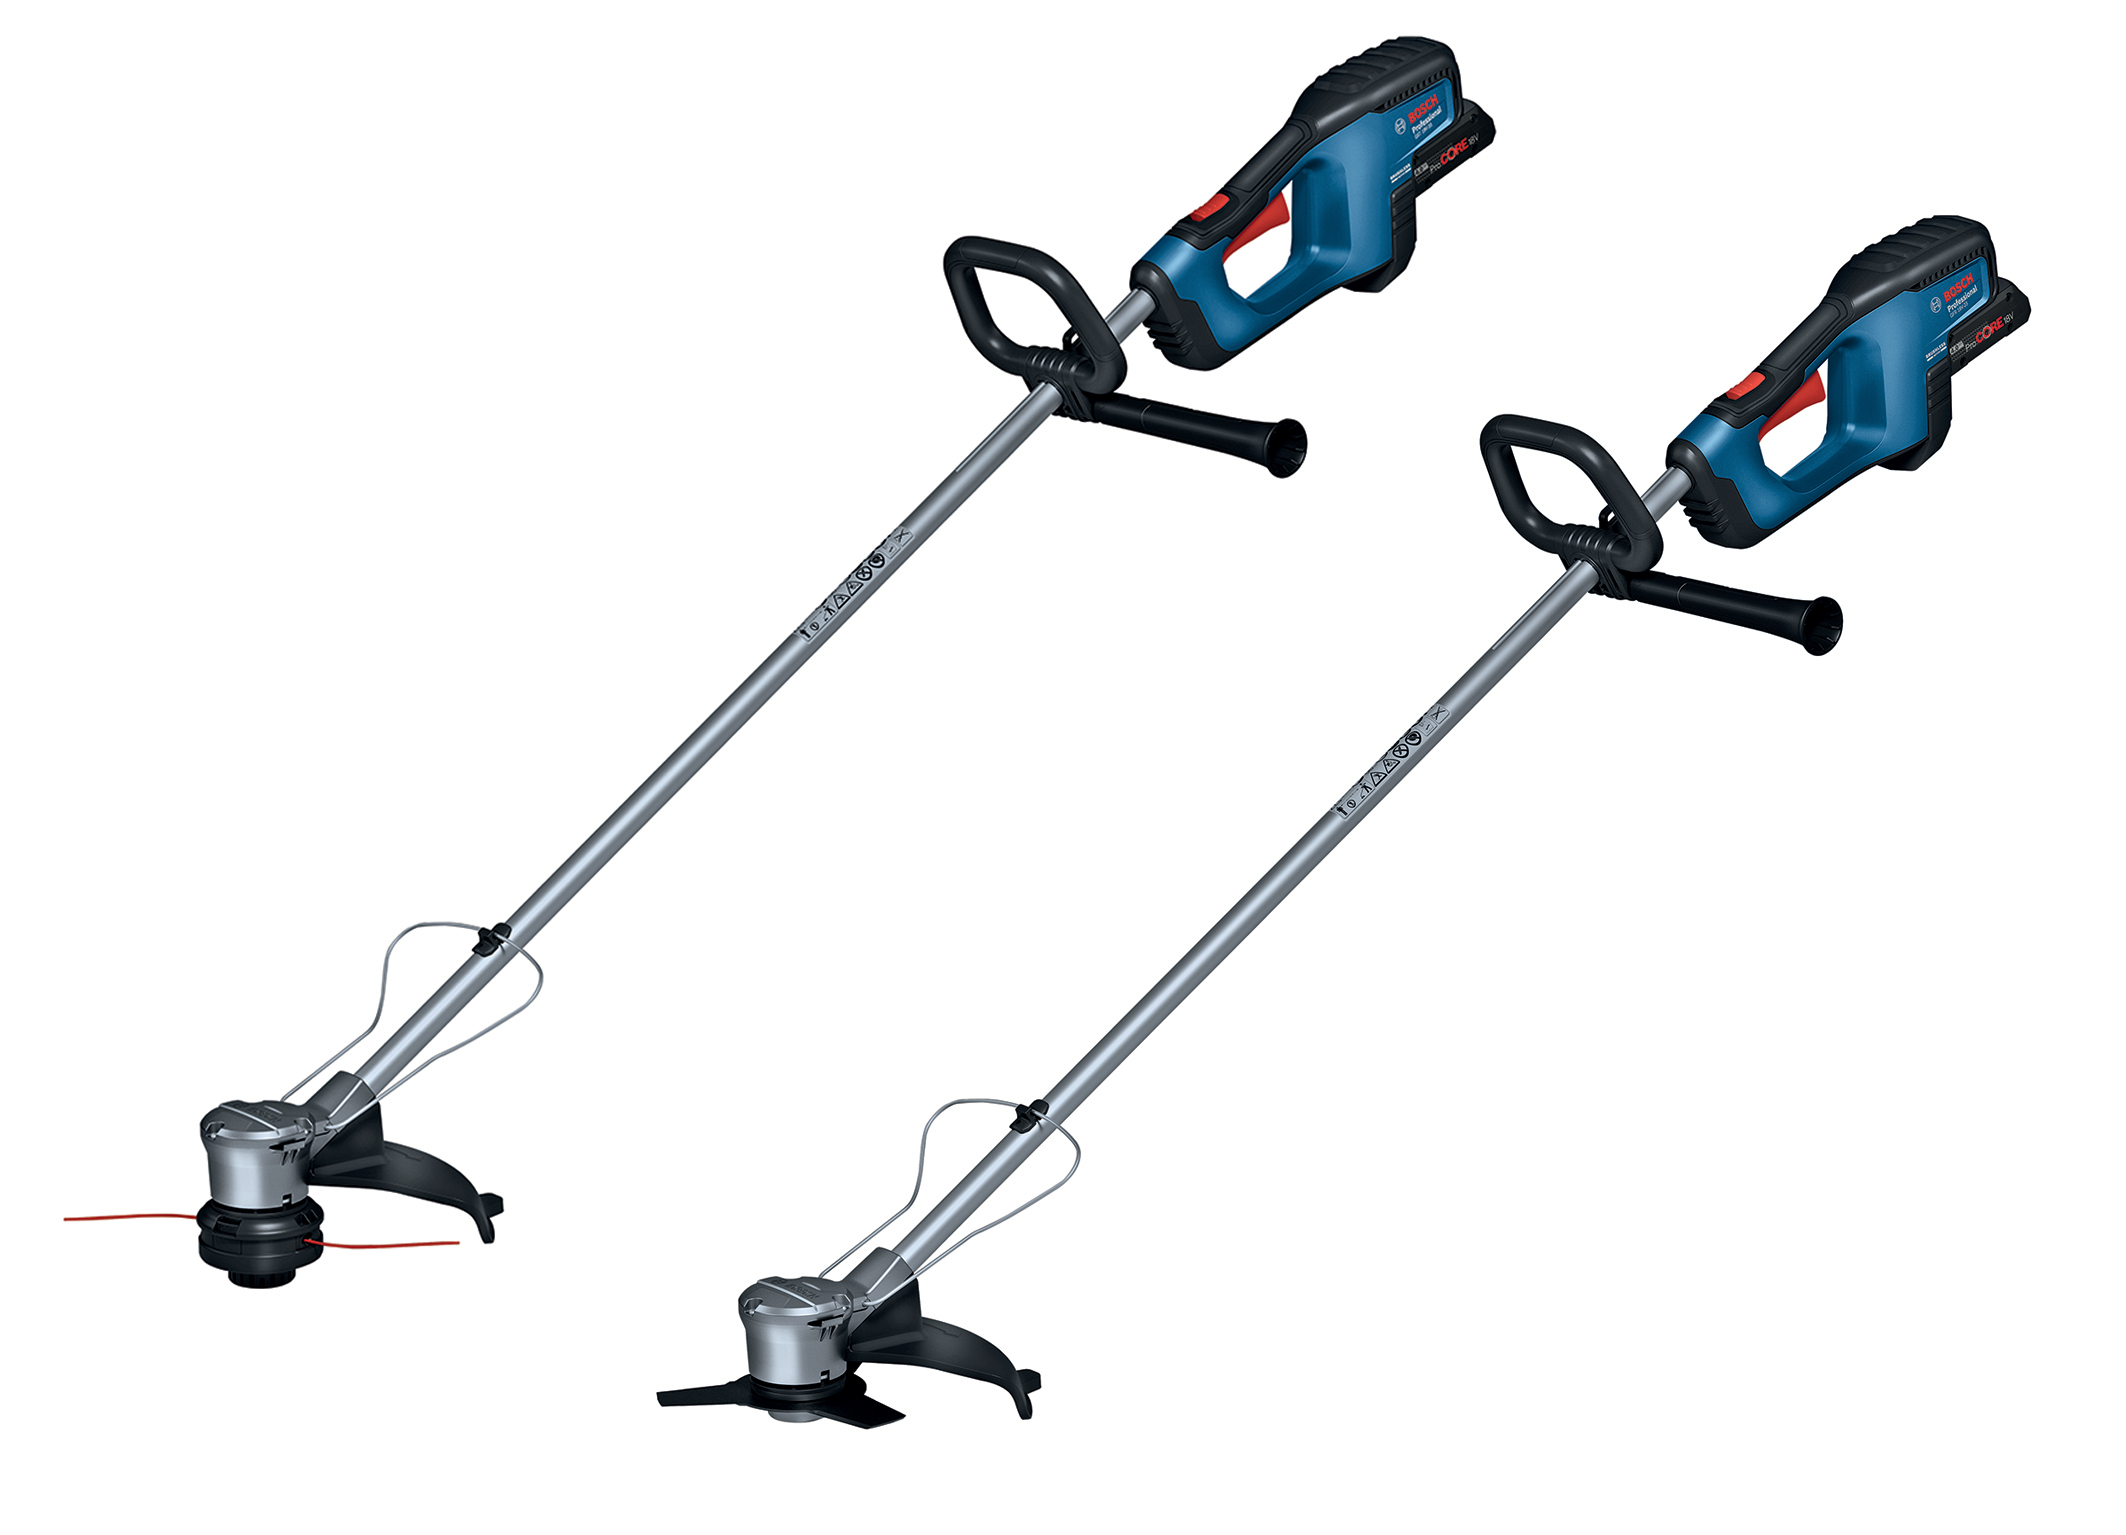 New growth in the Professional 18V System: Outdoor equipment like cordless grass trimmer and brush cutter from Bosch 